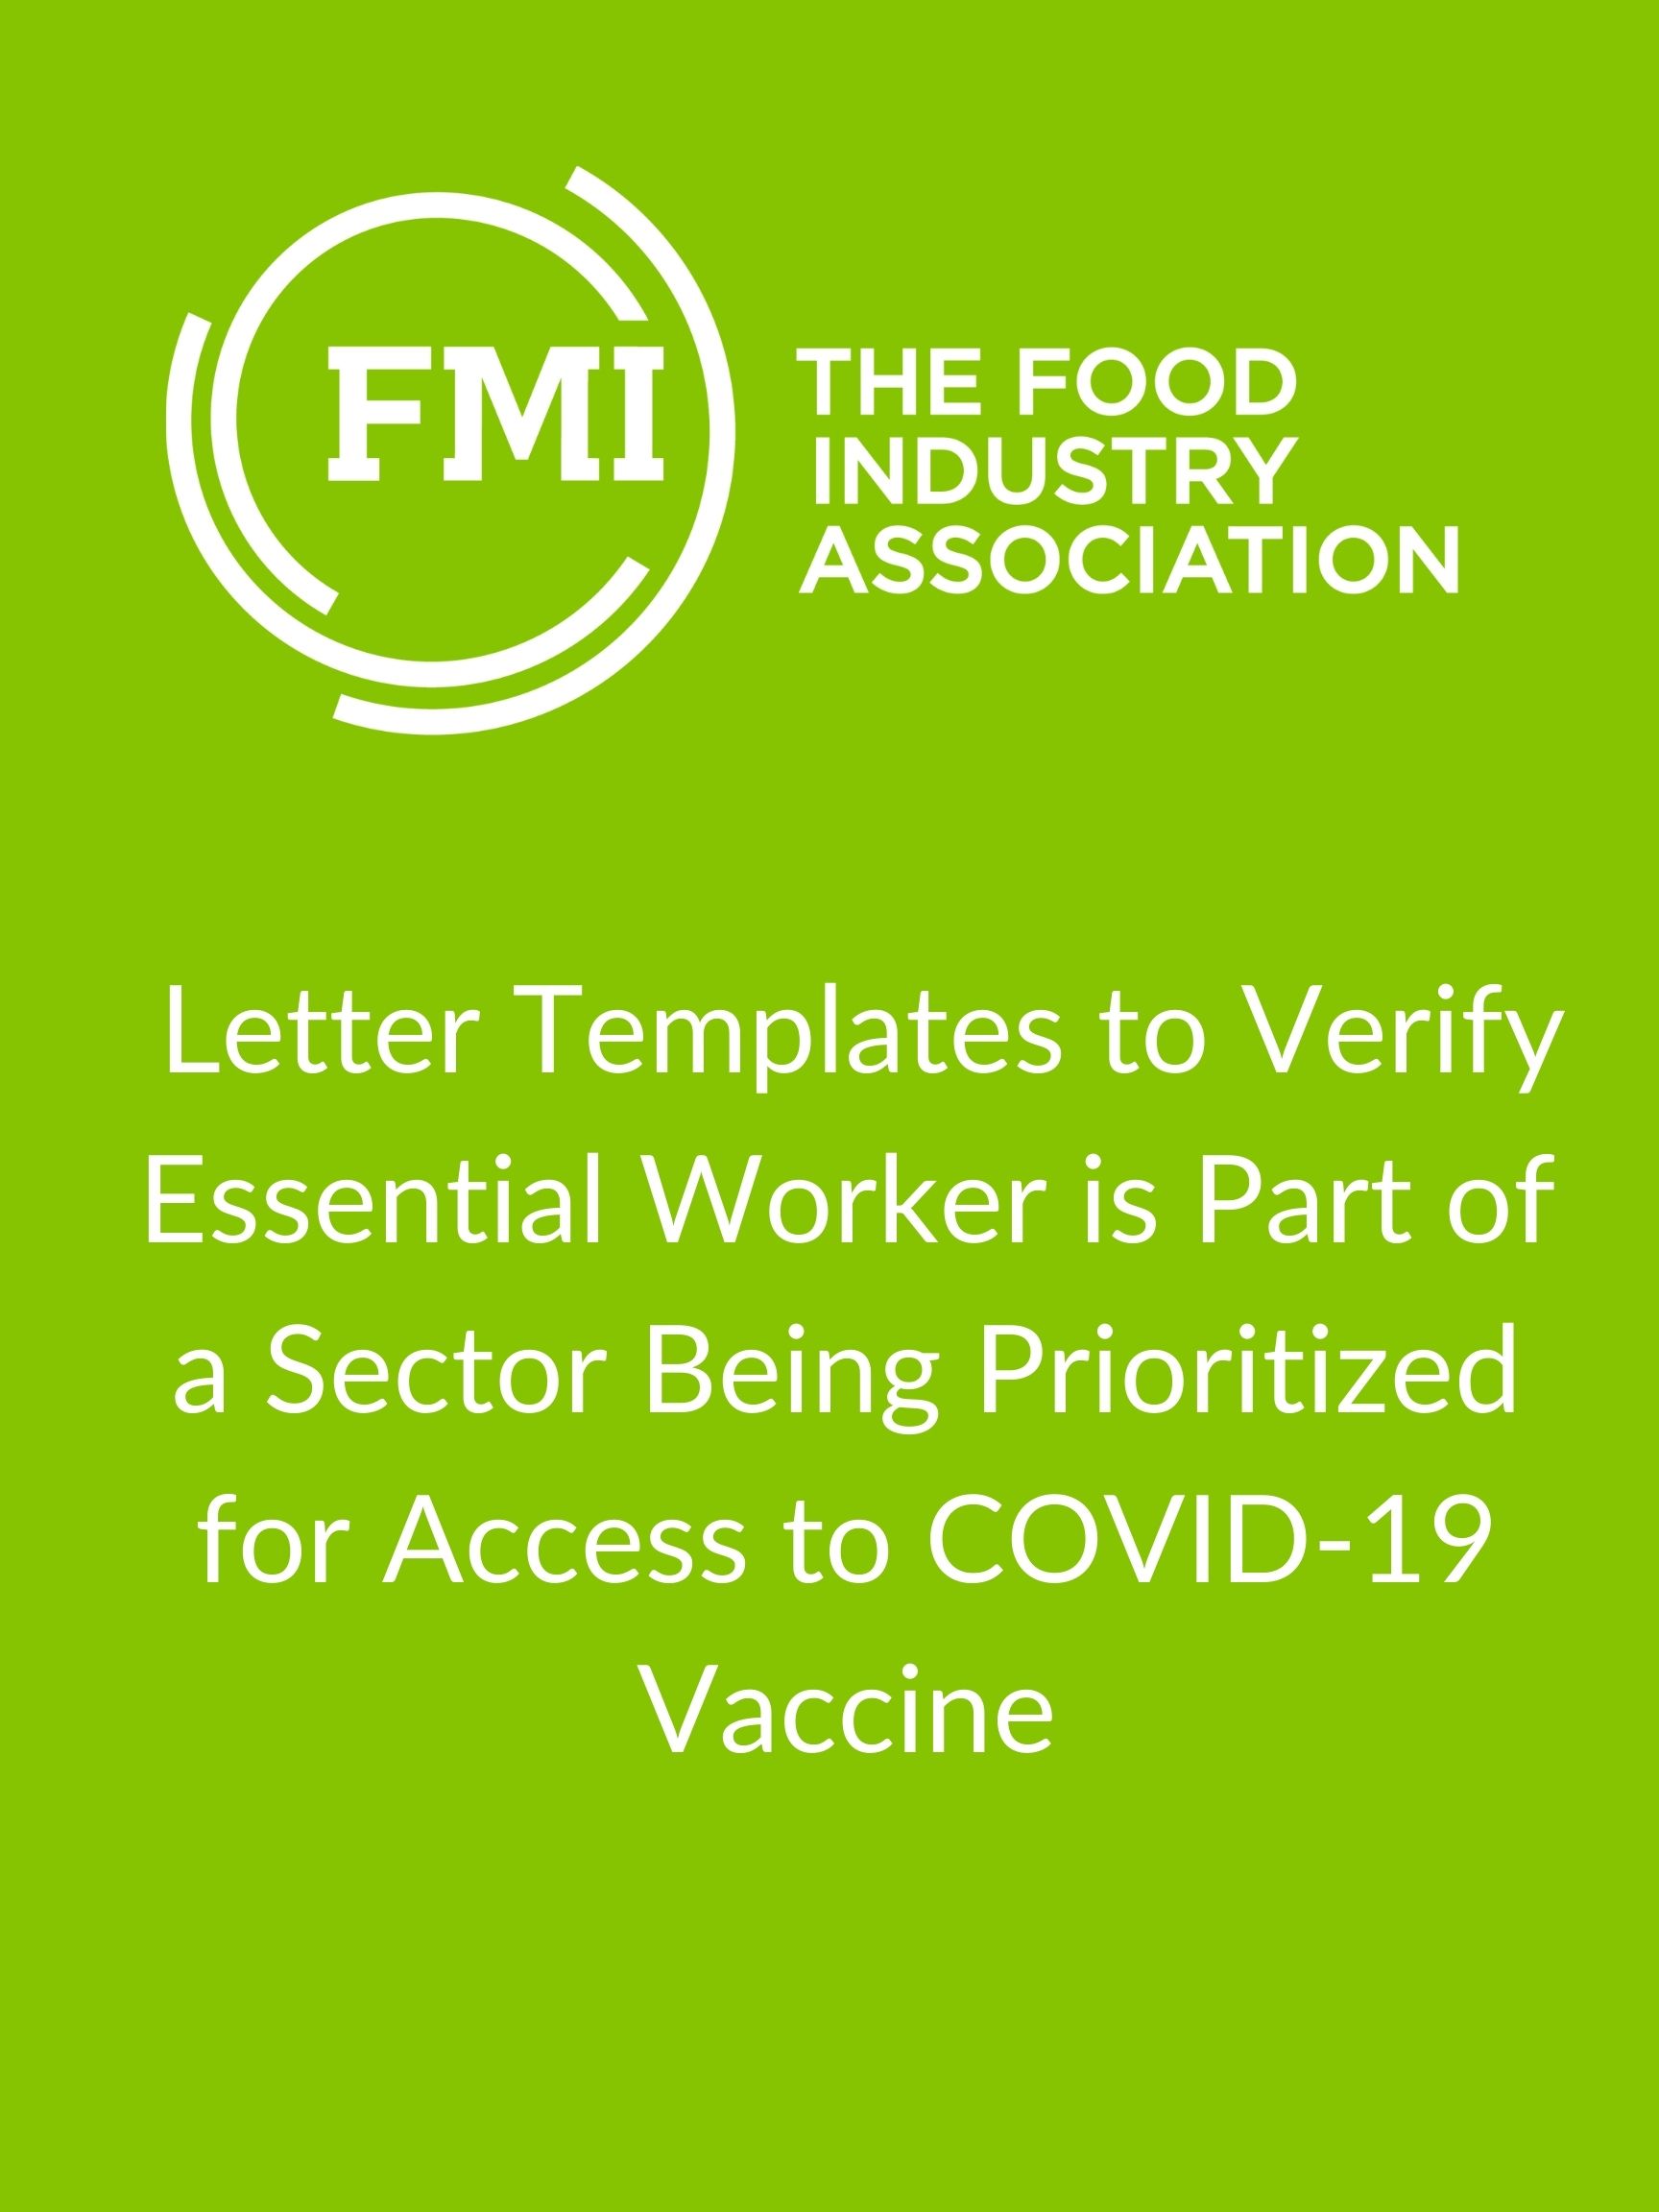 food and agriculture letter template frontline essential worker entitled to covid 19 vaccine prioritization 6